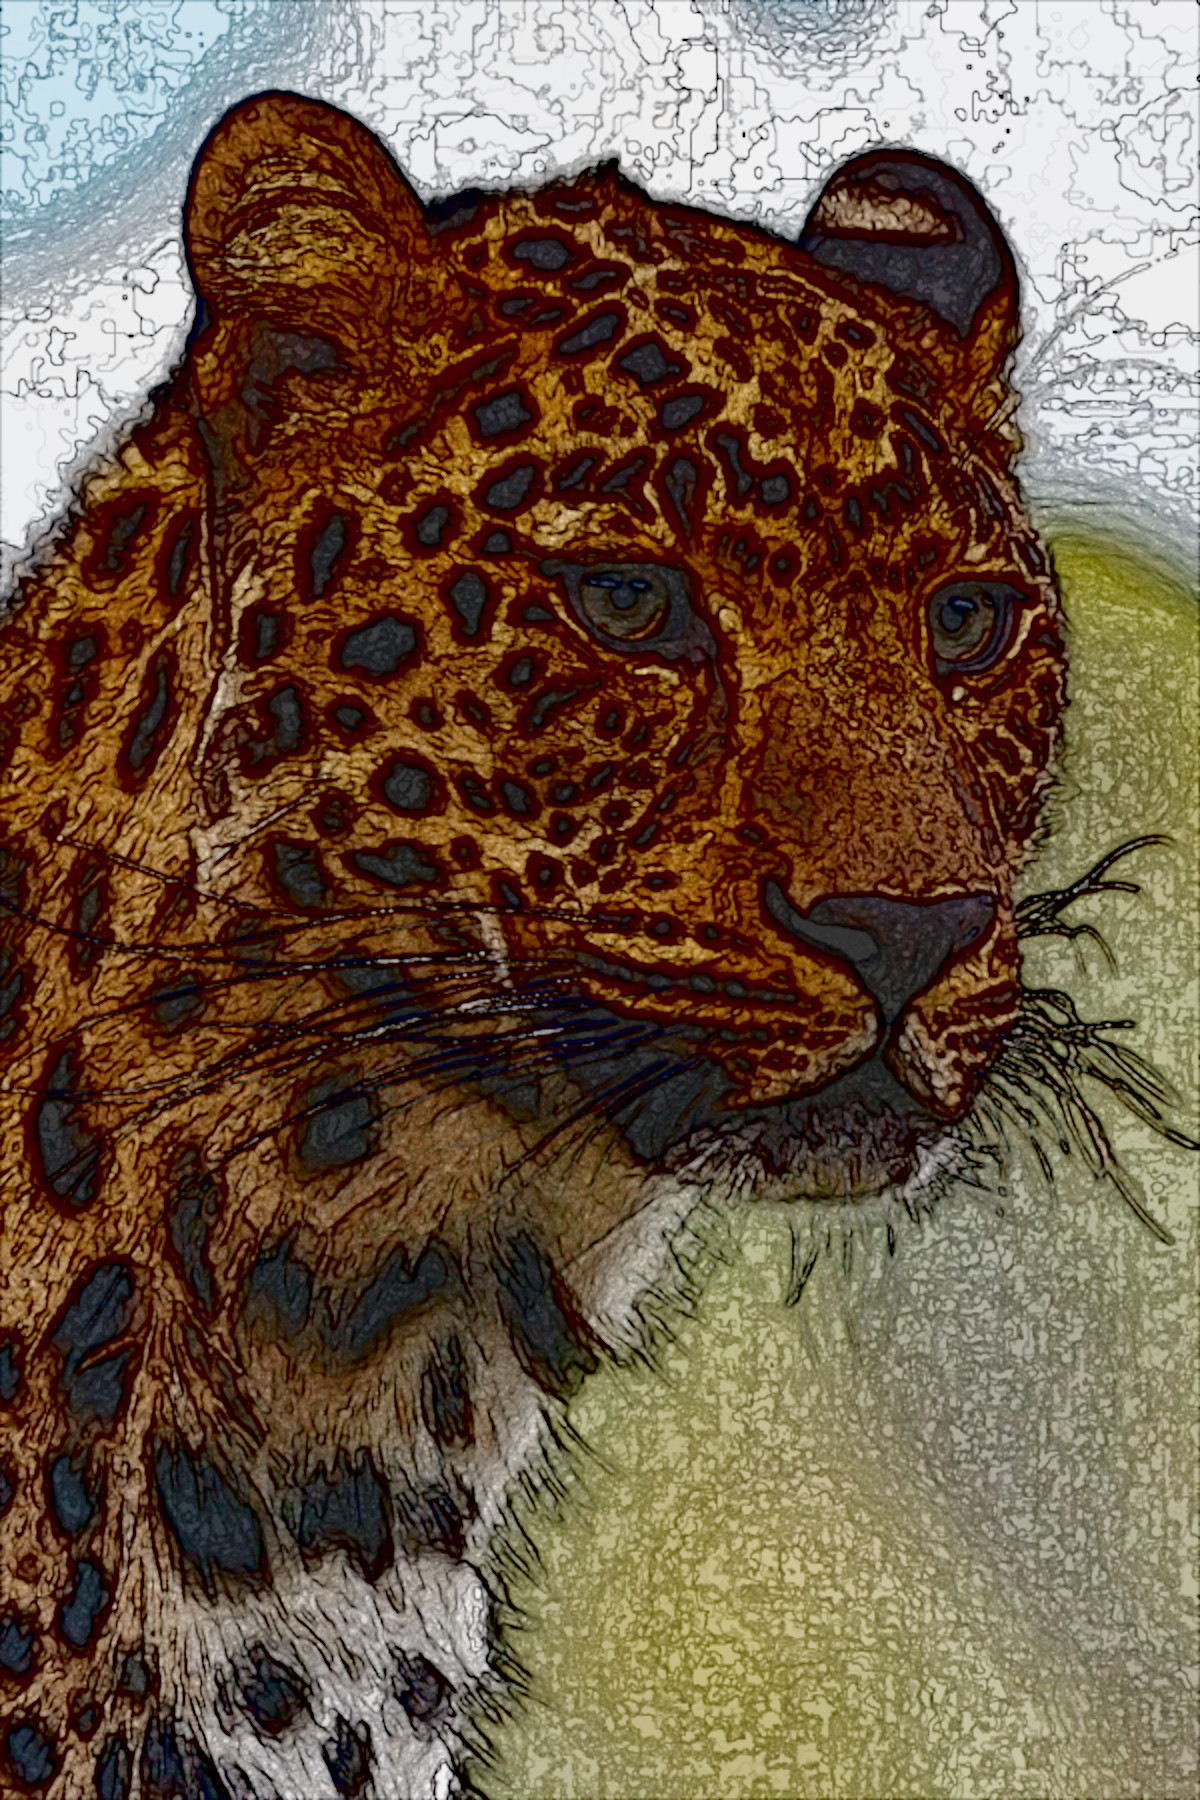 2021-04-24 15-42-44 cheetah-leopard-animal-big-87403 with effect A (MedianBlur+Edge), option colours (normal texture) and draw look=medium.jpeg